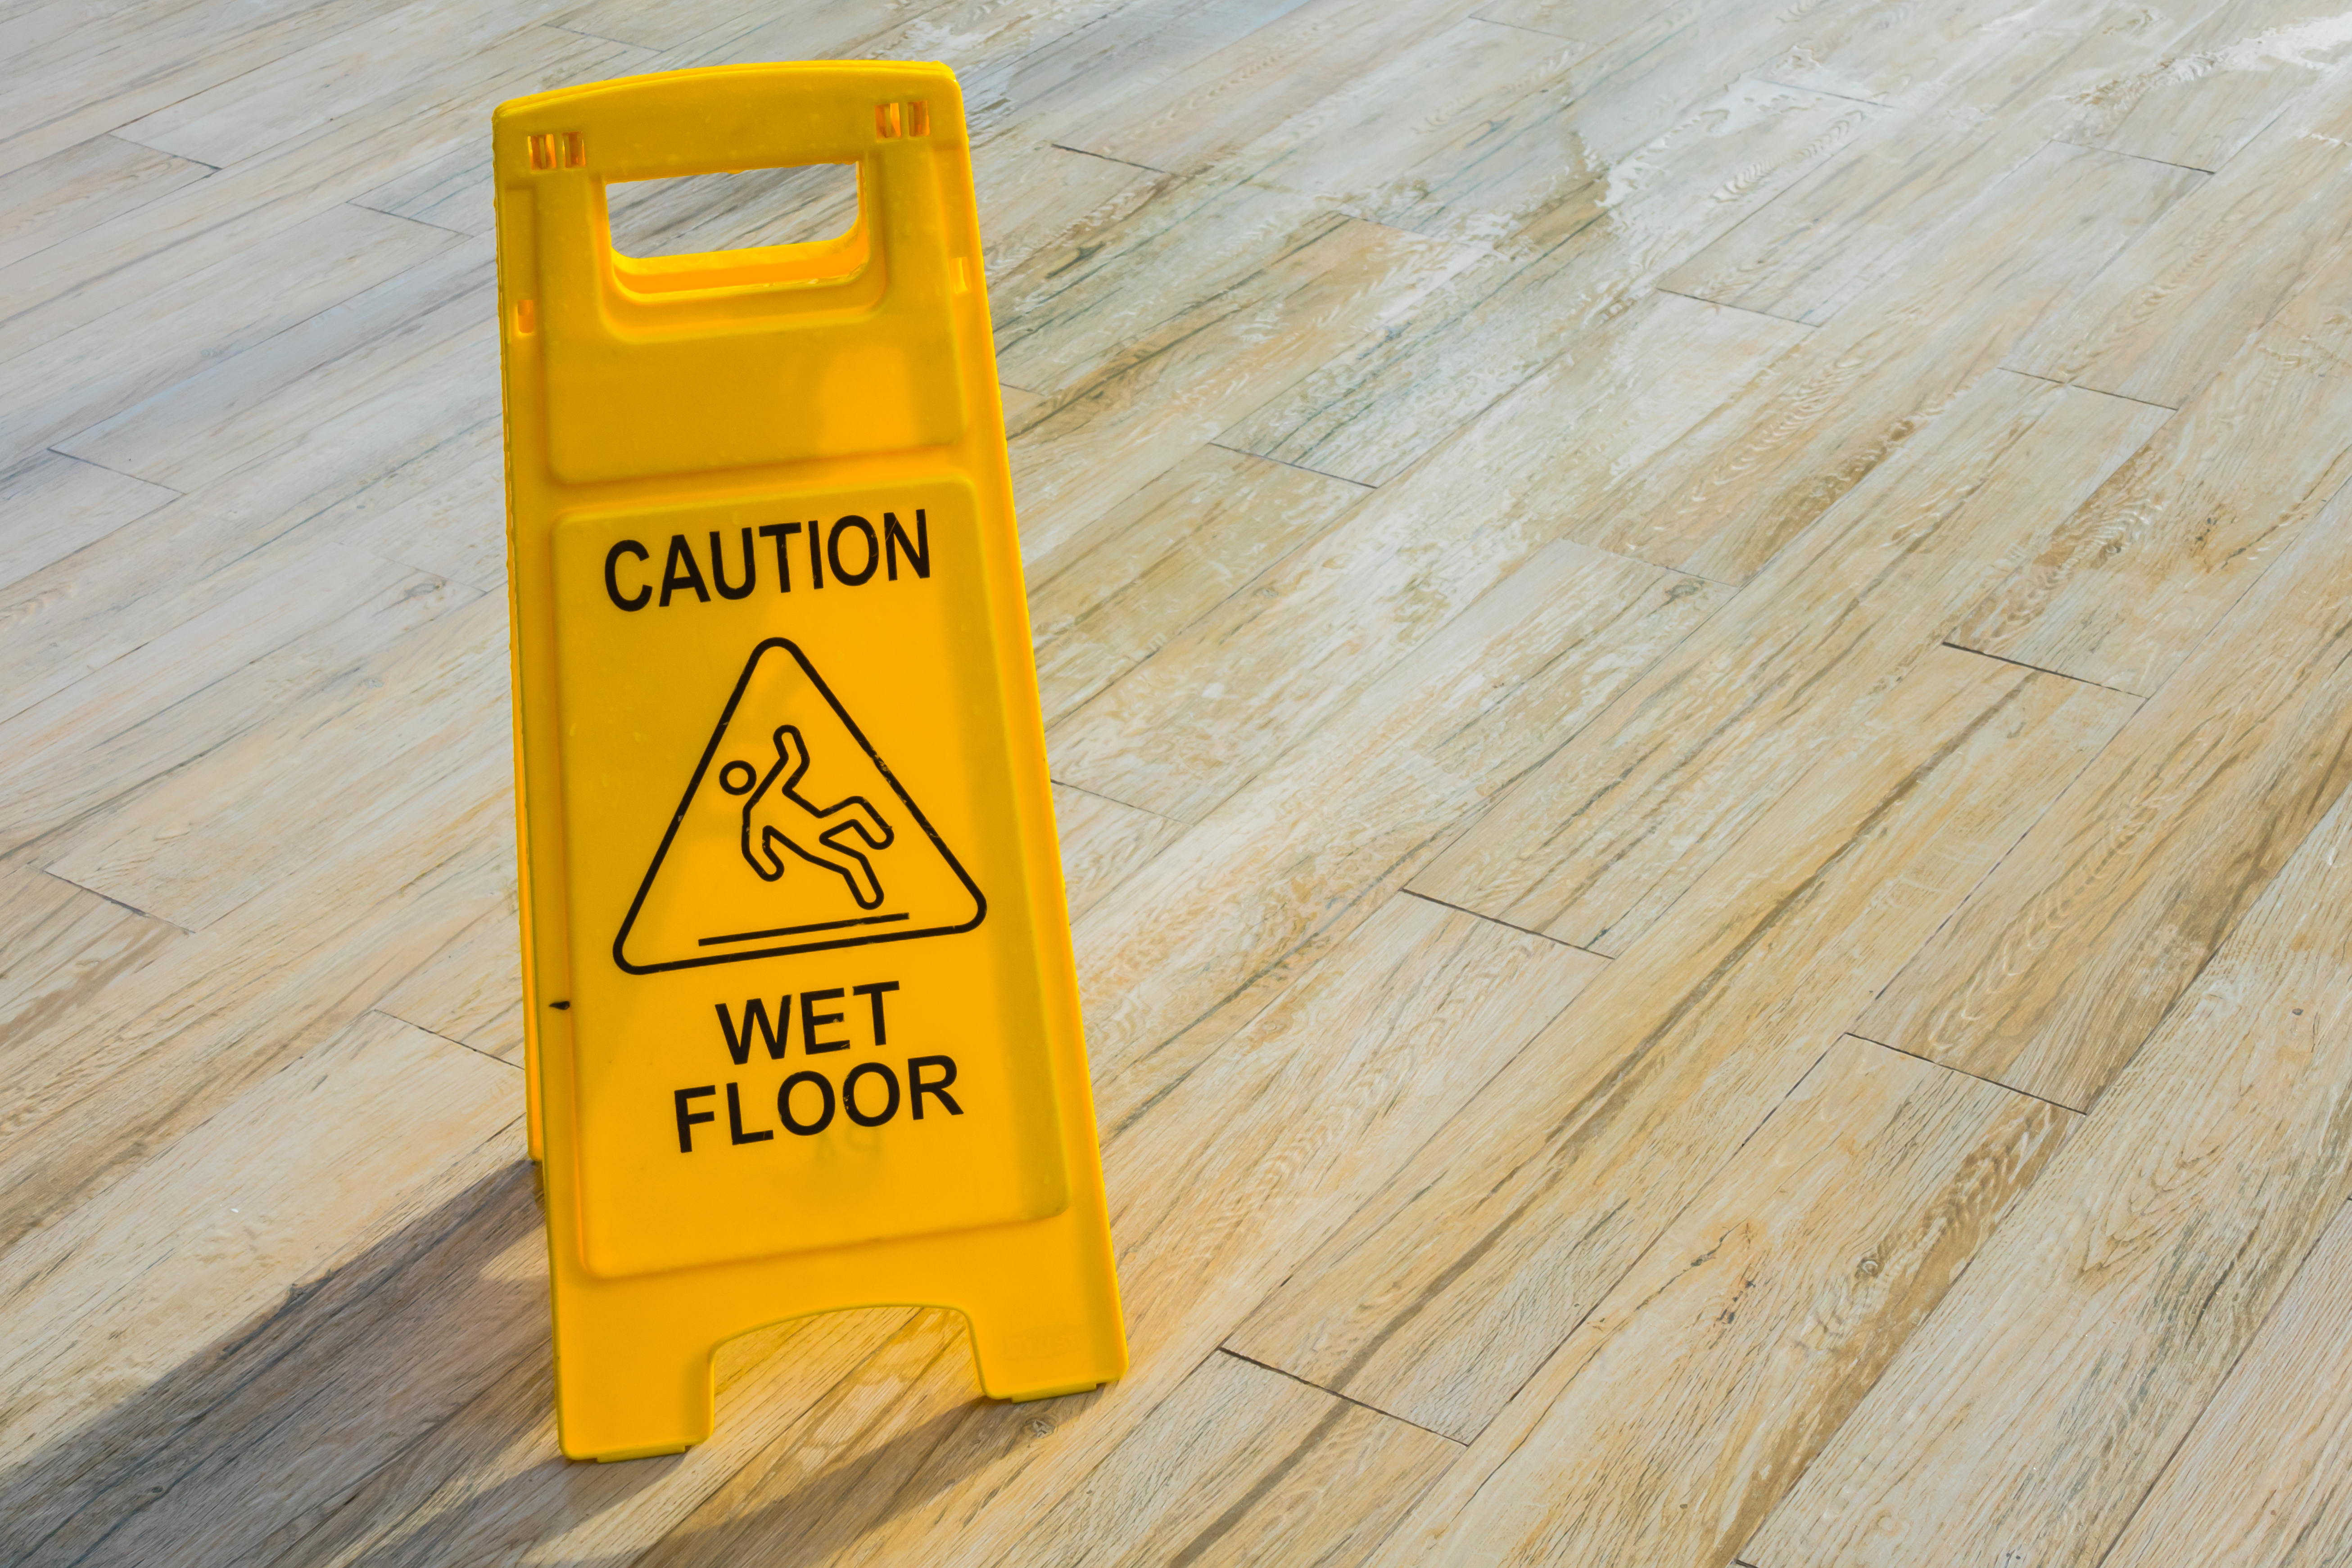 Tile Safety-10 Reasons Why Slip Resistance Matters